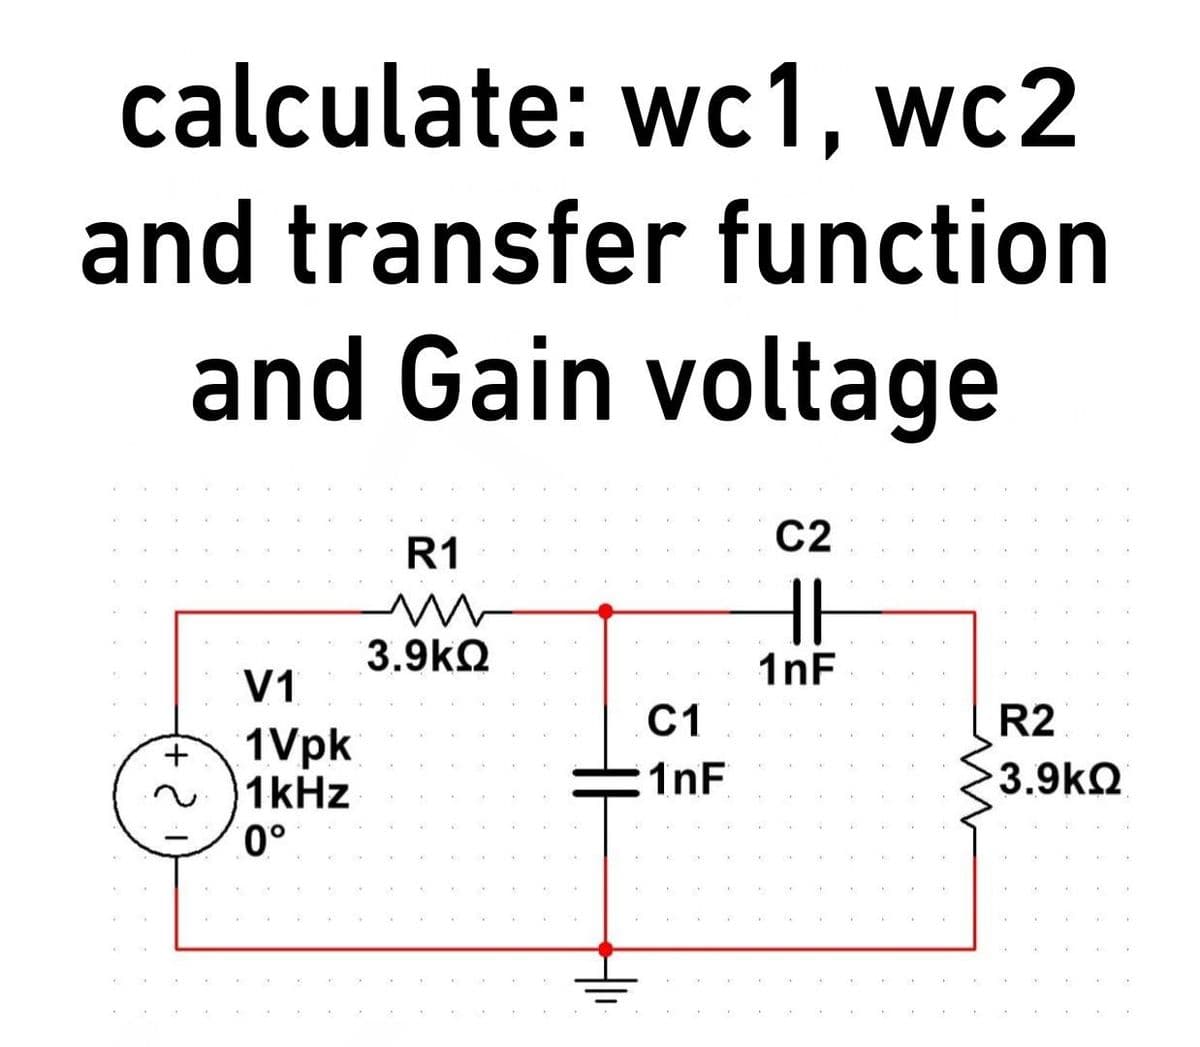 calculate: wc1, wc2
and transfer function
and Gain voltage
R1
C2
3.9kQ
1nF
V1
C1
R2
1Vpk
1kHz
0°
+
1nF
3.9kQ
